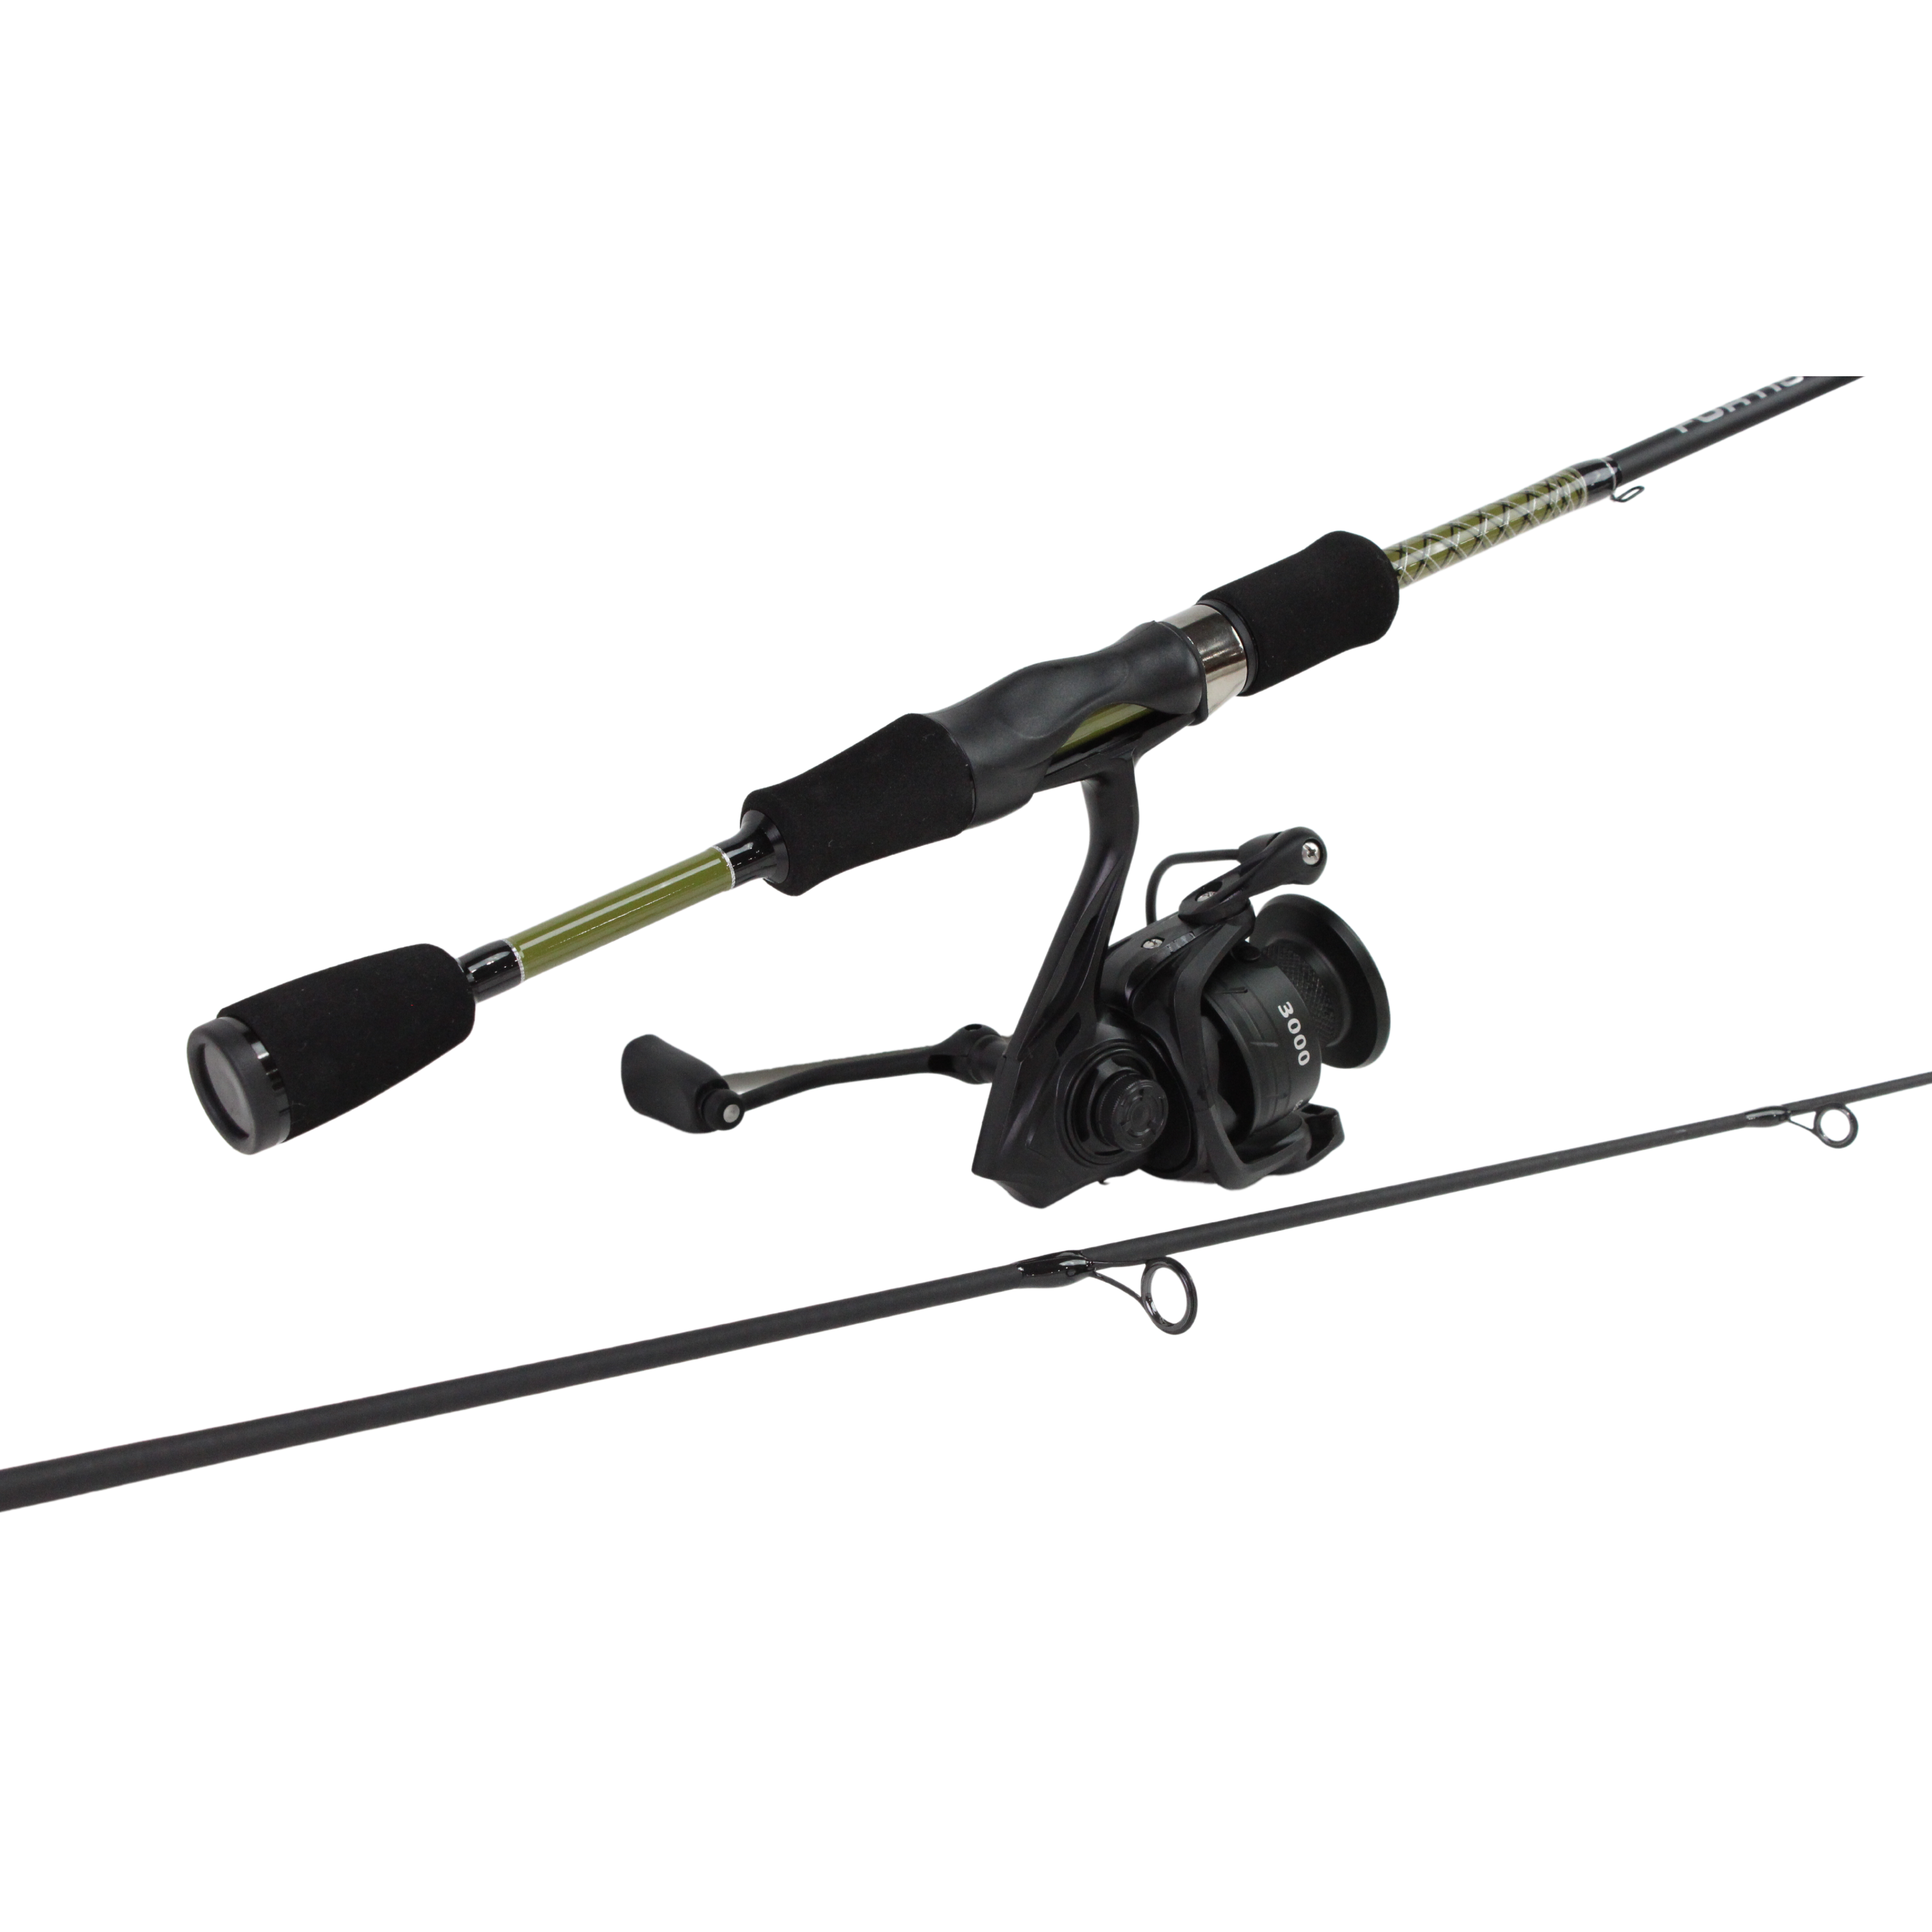 FORTIS 5' 6" Light Action 2 Piece Spinning Rod and 3000 Spinning Reel Package (FSP562L)